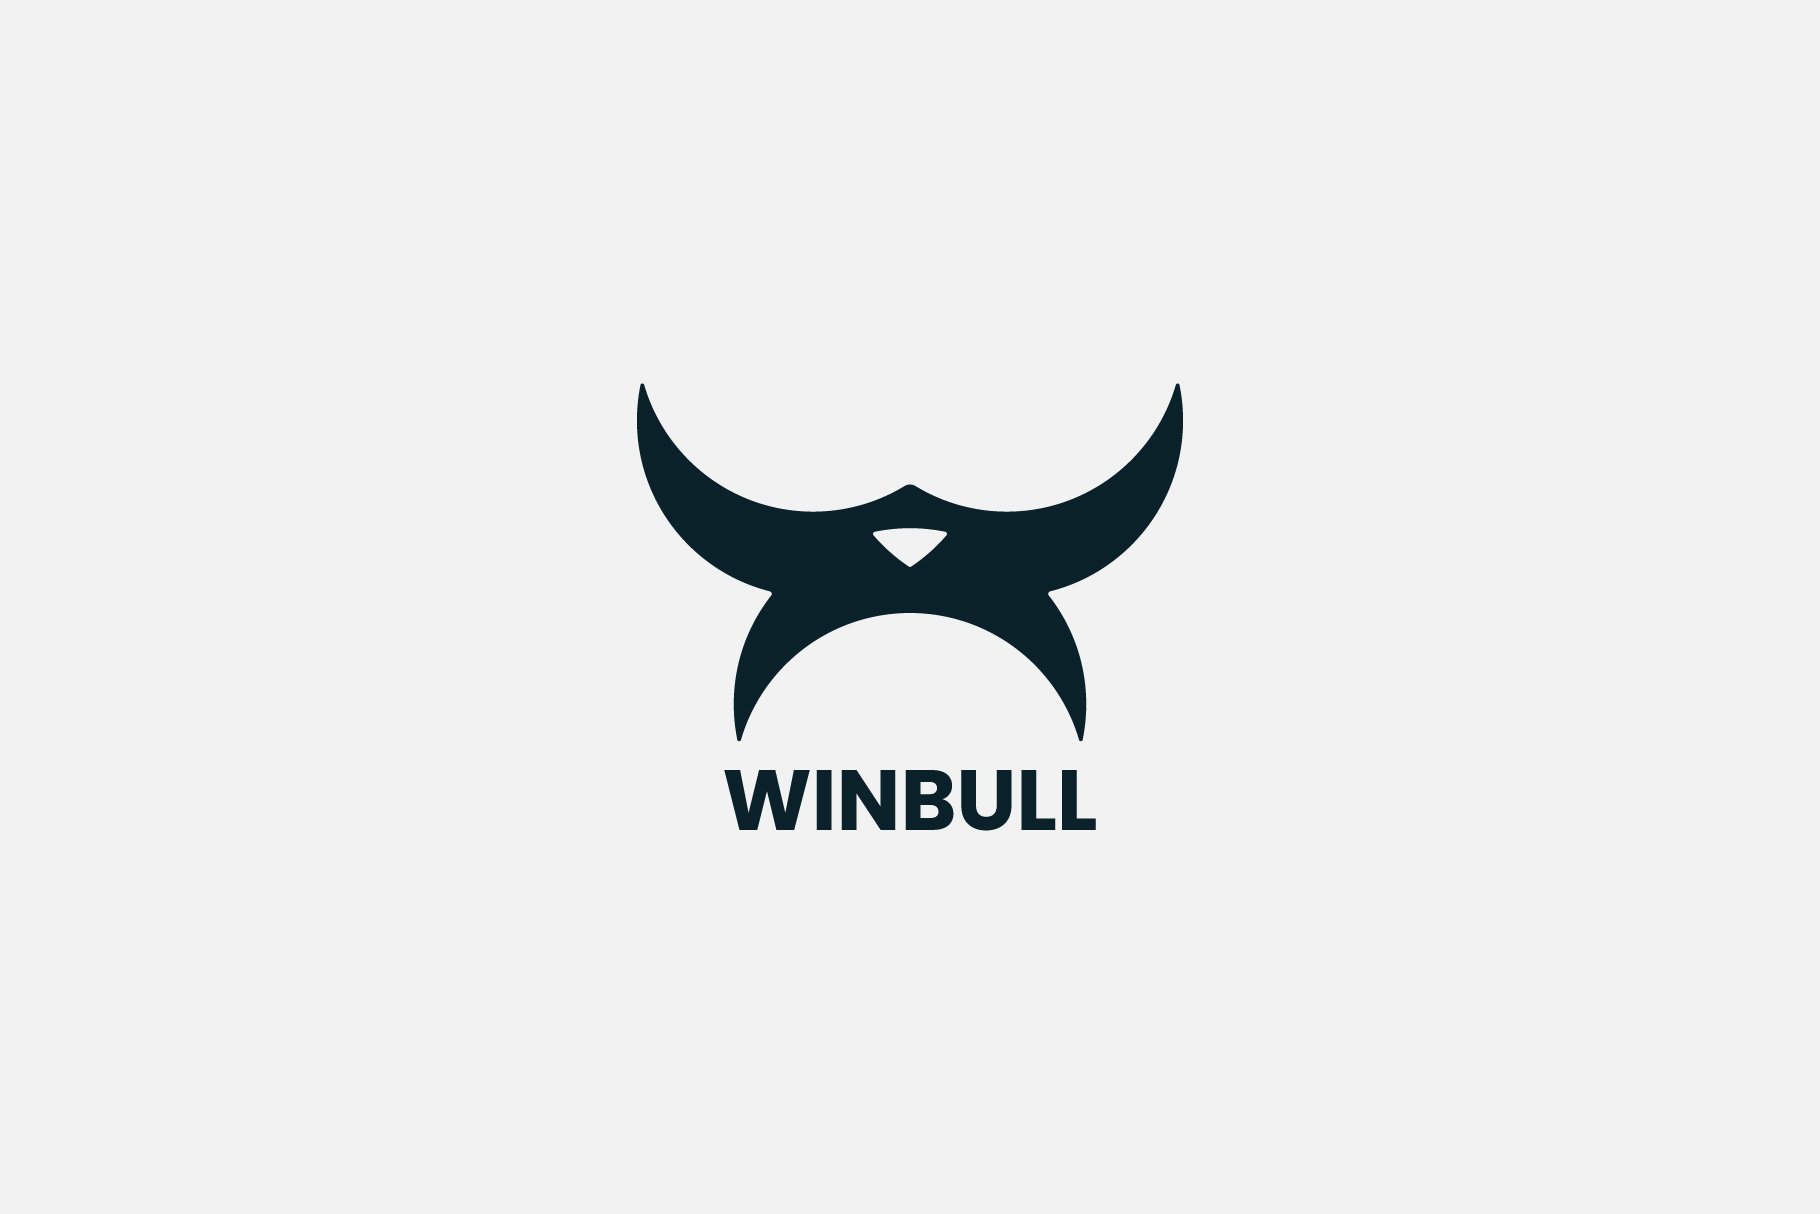 WinBull logo preview image.